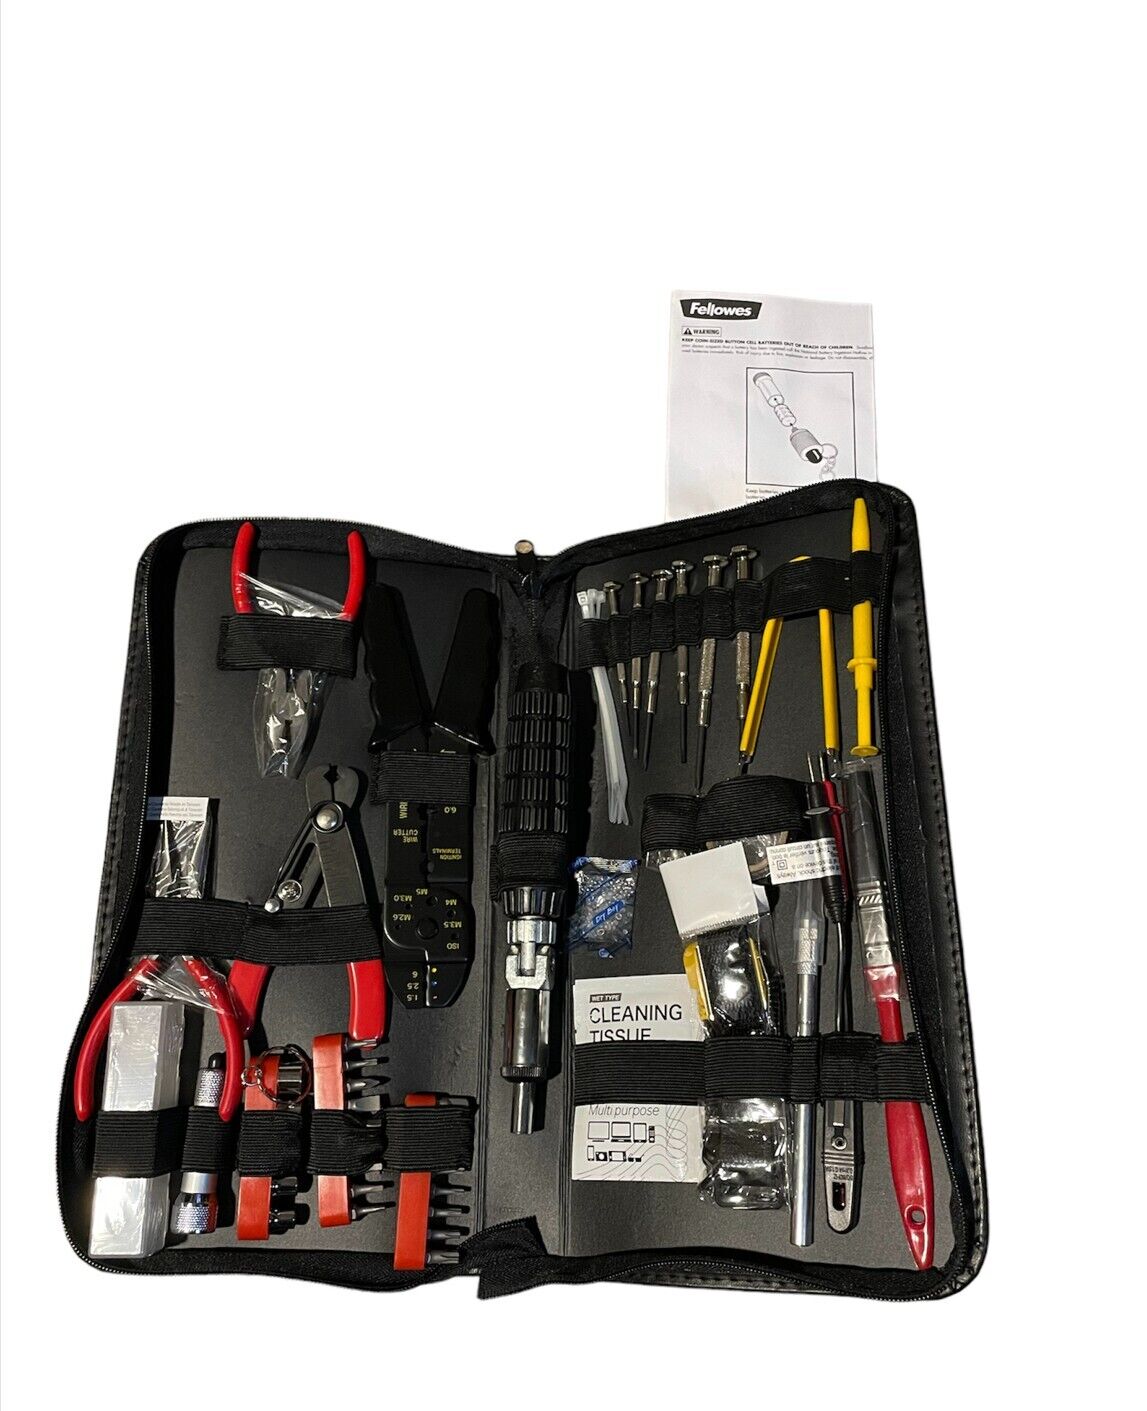 Fellowes 55 Piece Computer Tool Kit For Repairs Maintaining Upgrading Fellowes does not apply